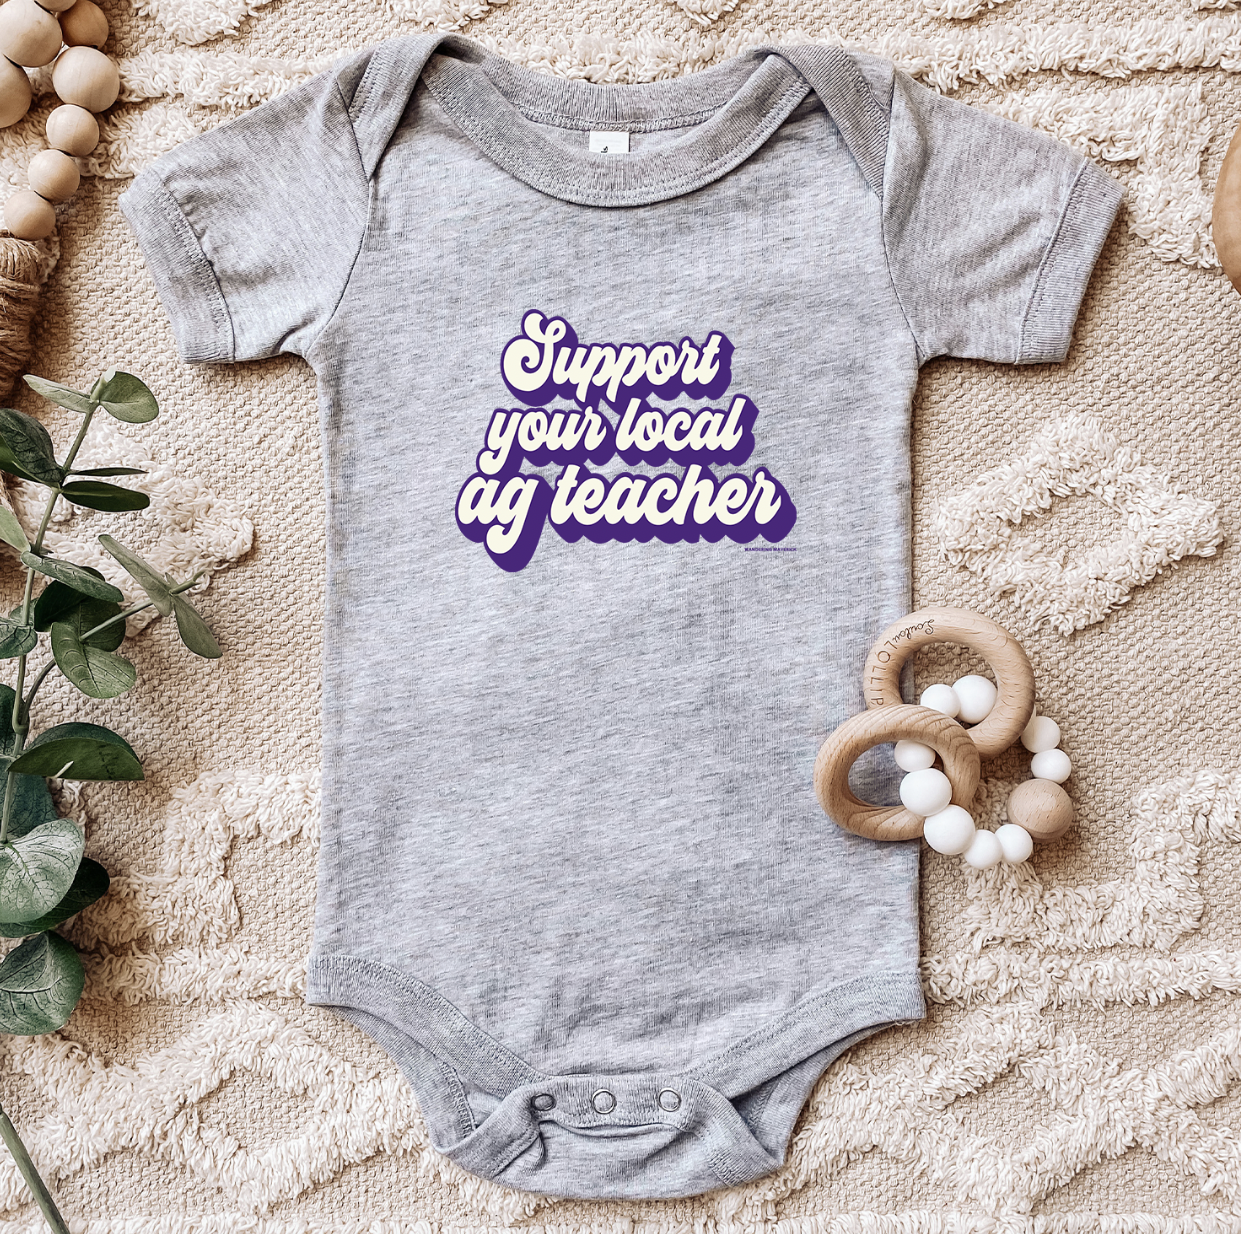 Retro Support Your Local Ag Teacher Purple One Piece/T-Shirt (Newborn - Youth XL) - Multiple Colors!